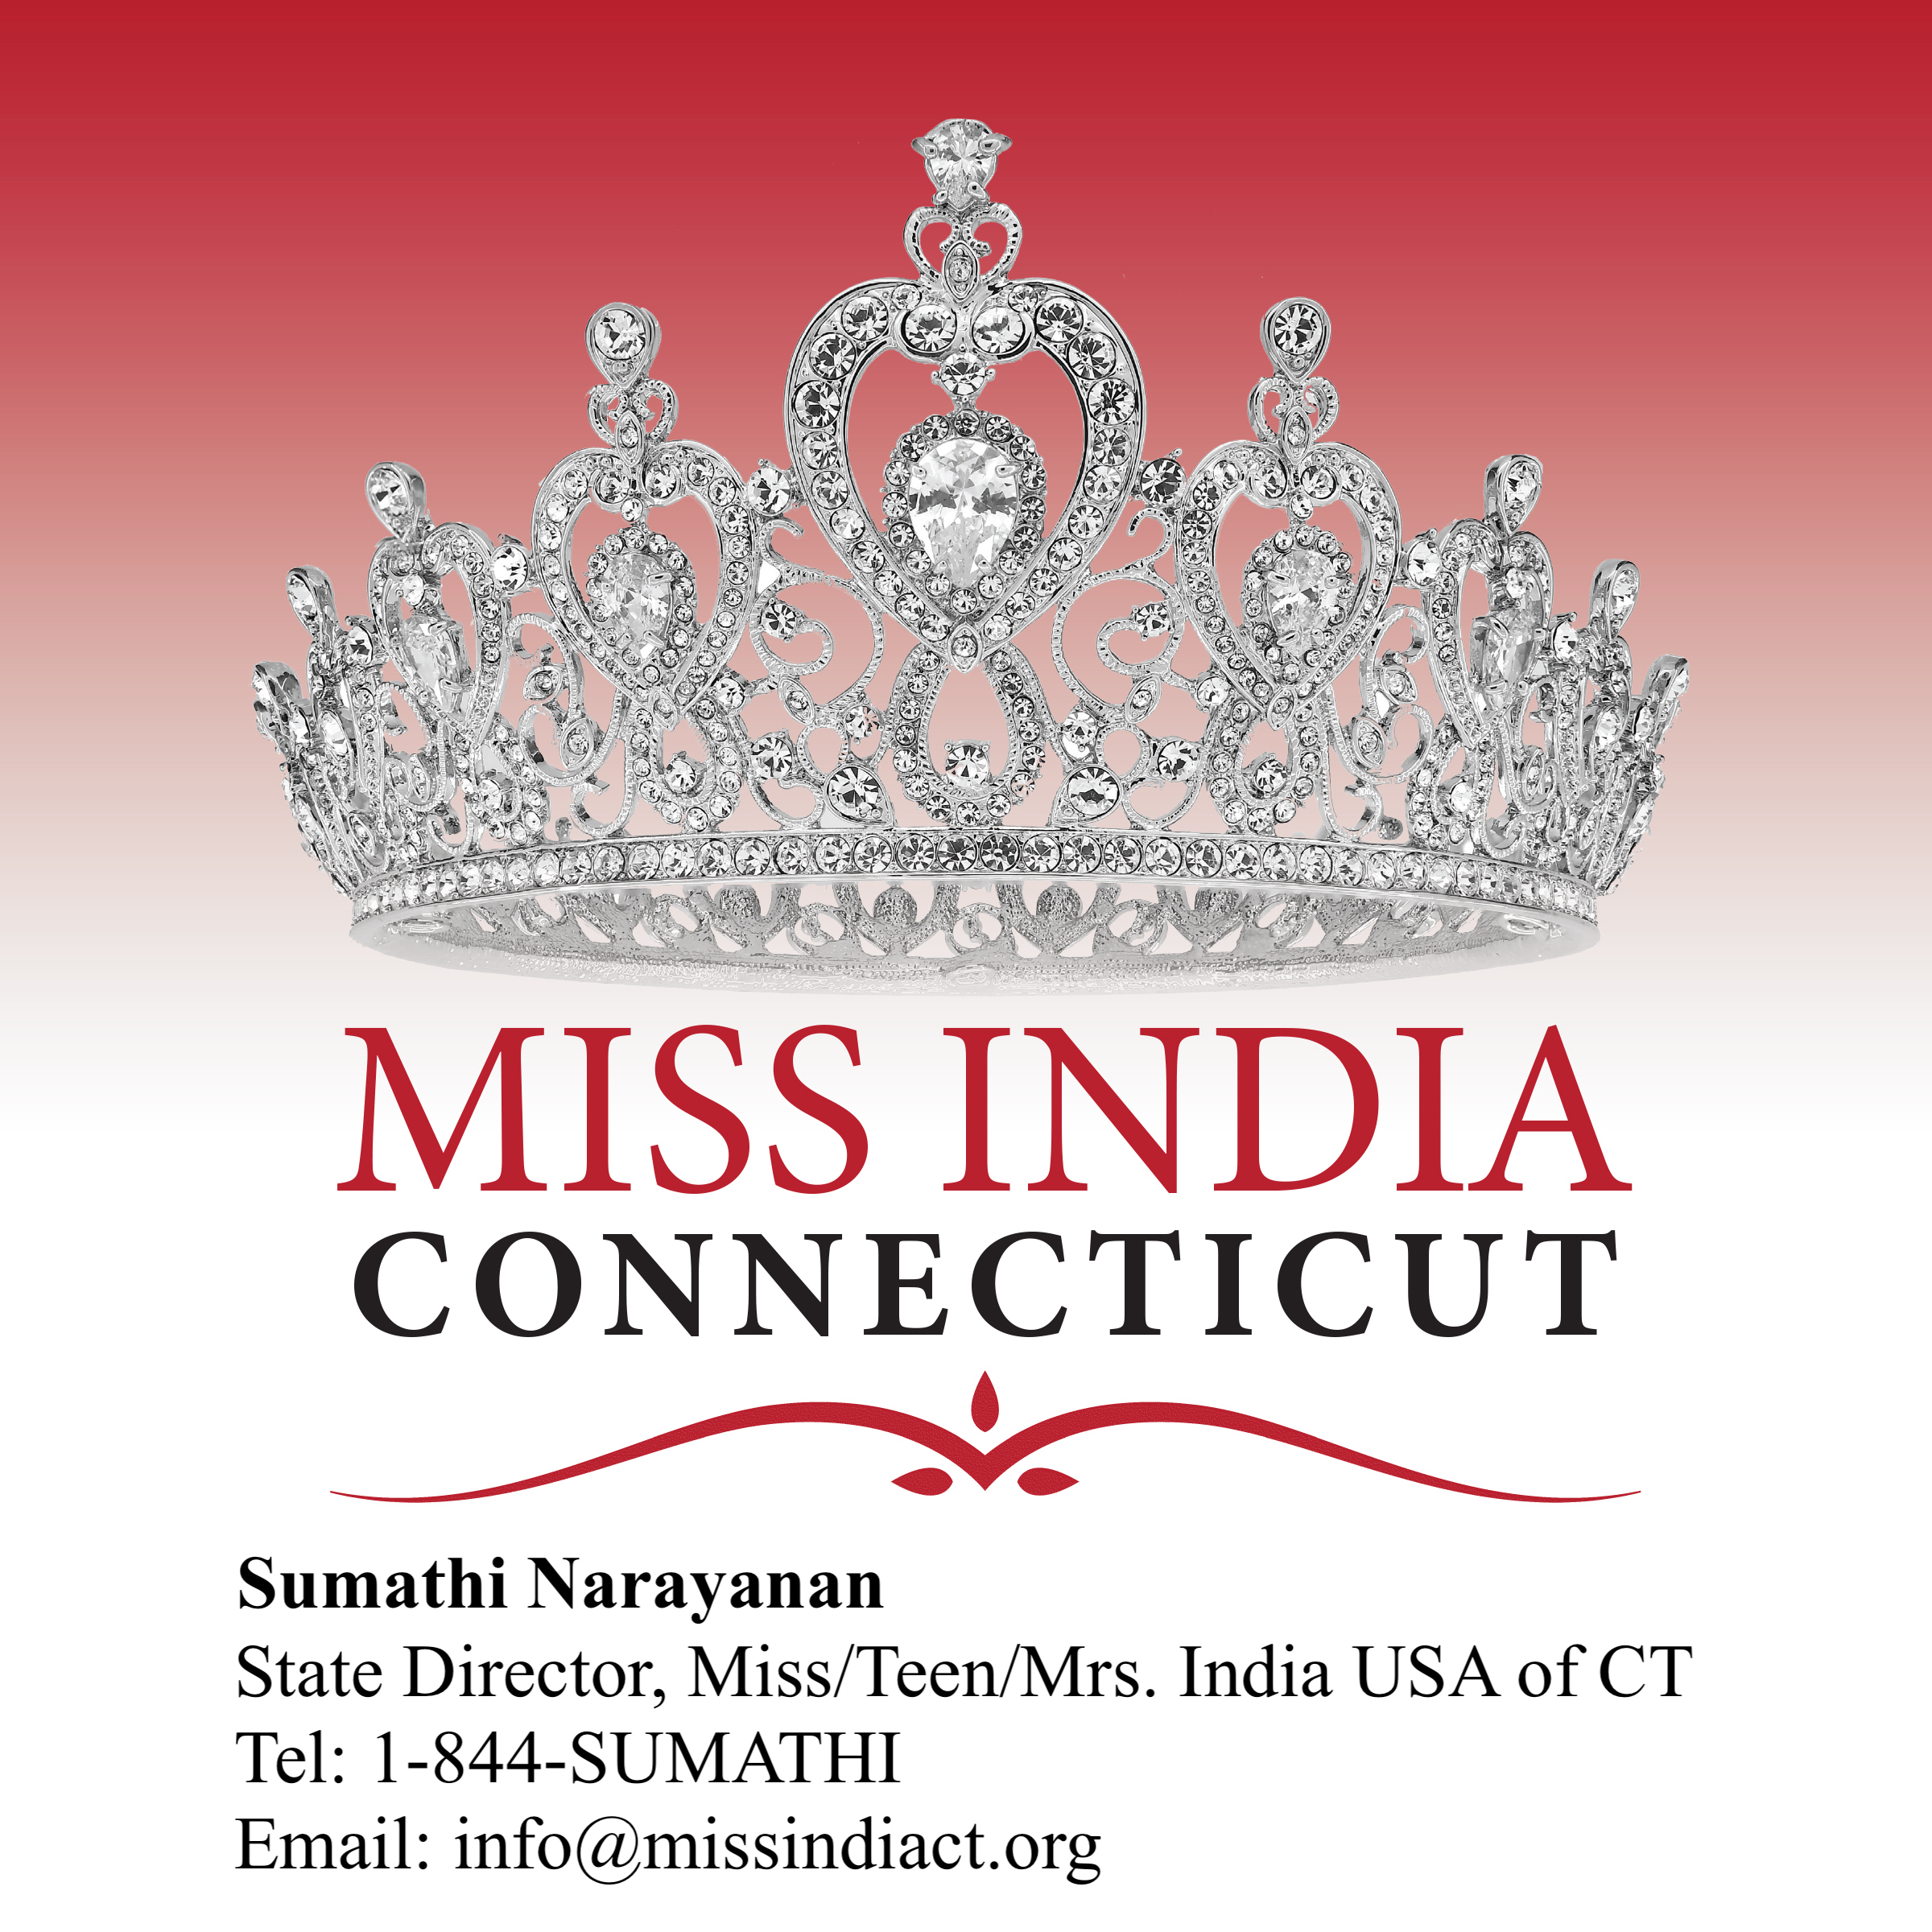 Miss India CT Logo with Sumathi's Contact Information